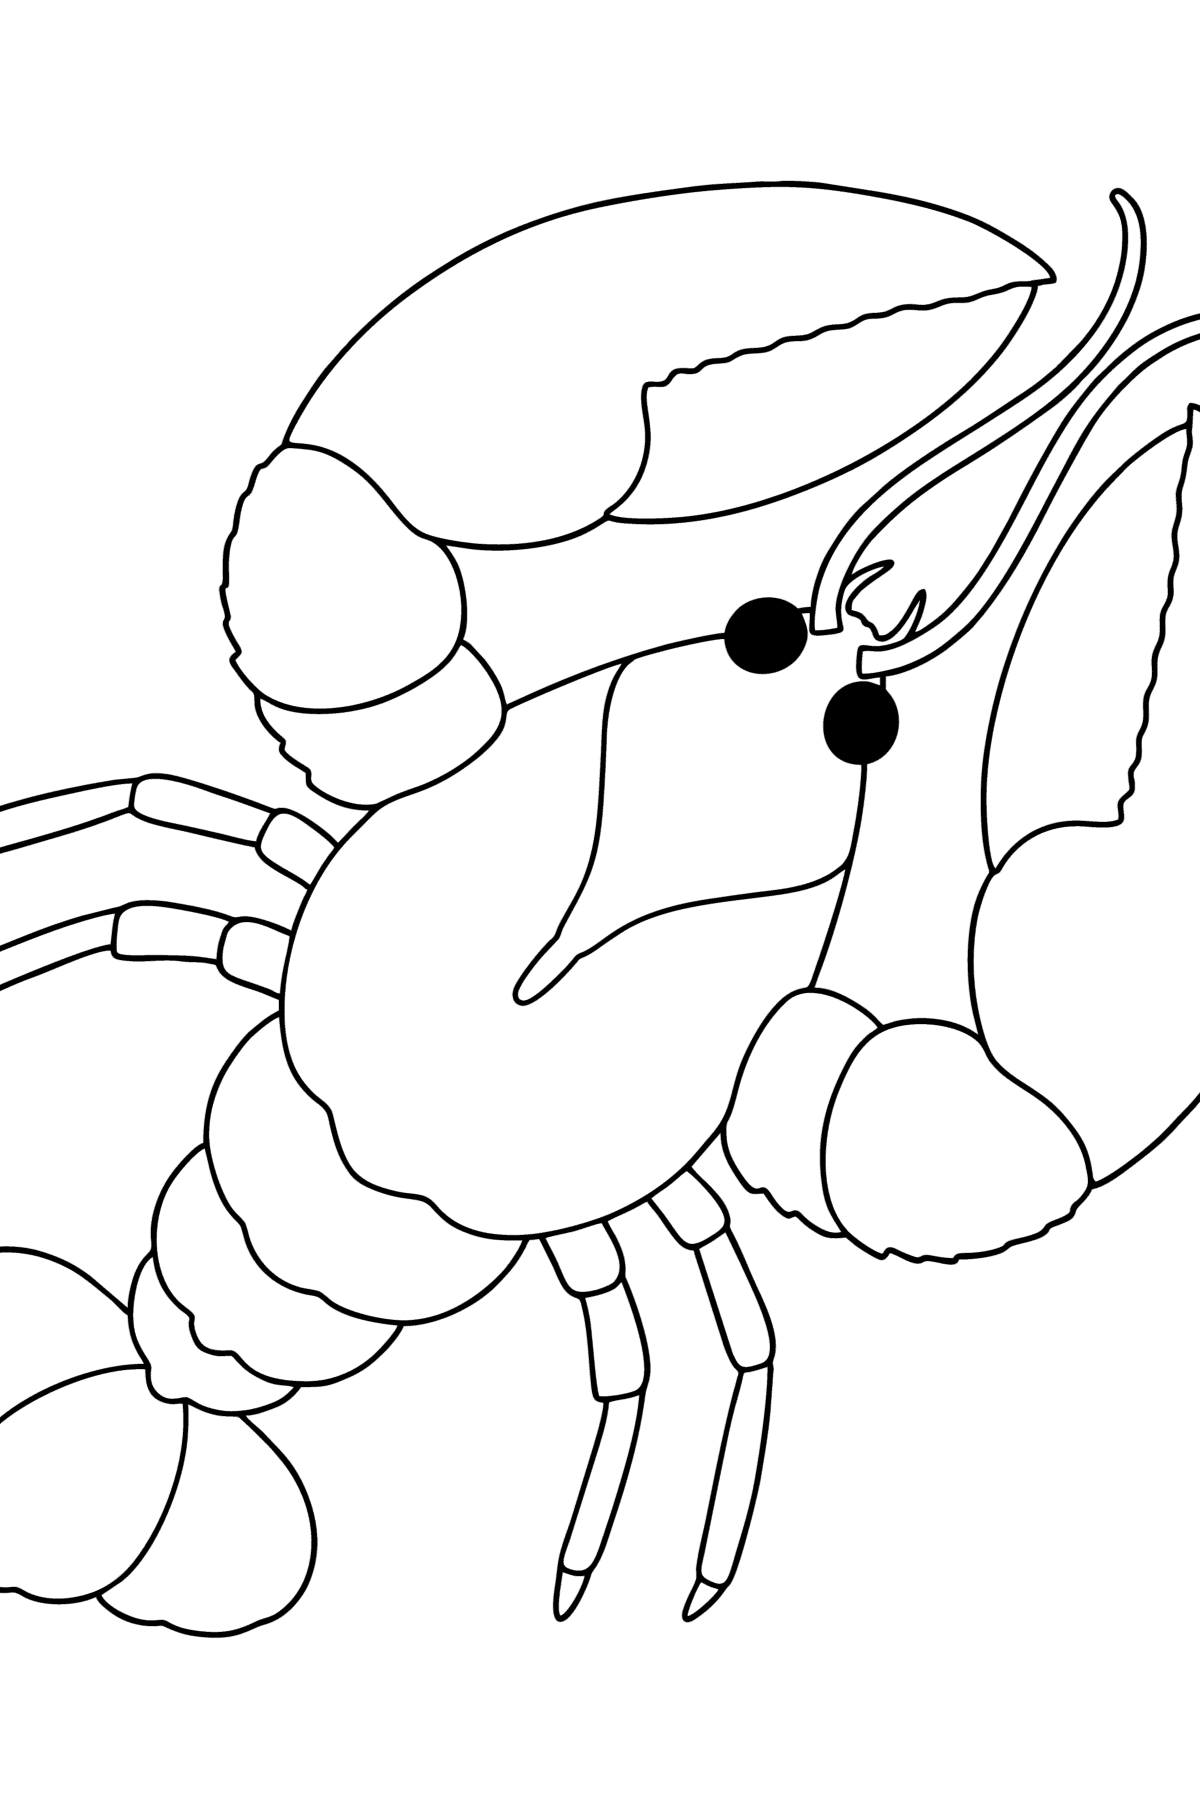 Coloring page Lobster for Kids - Play online for Free